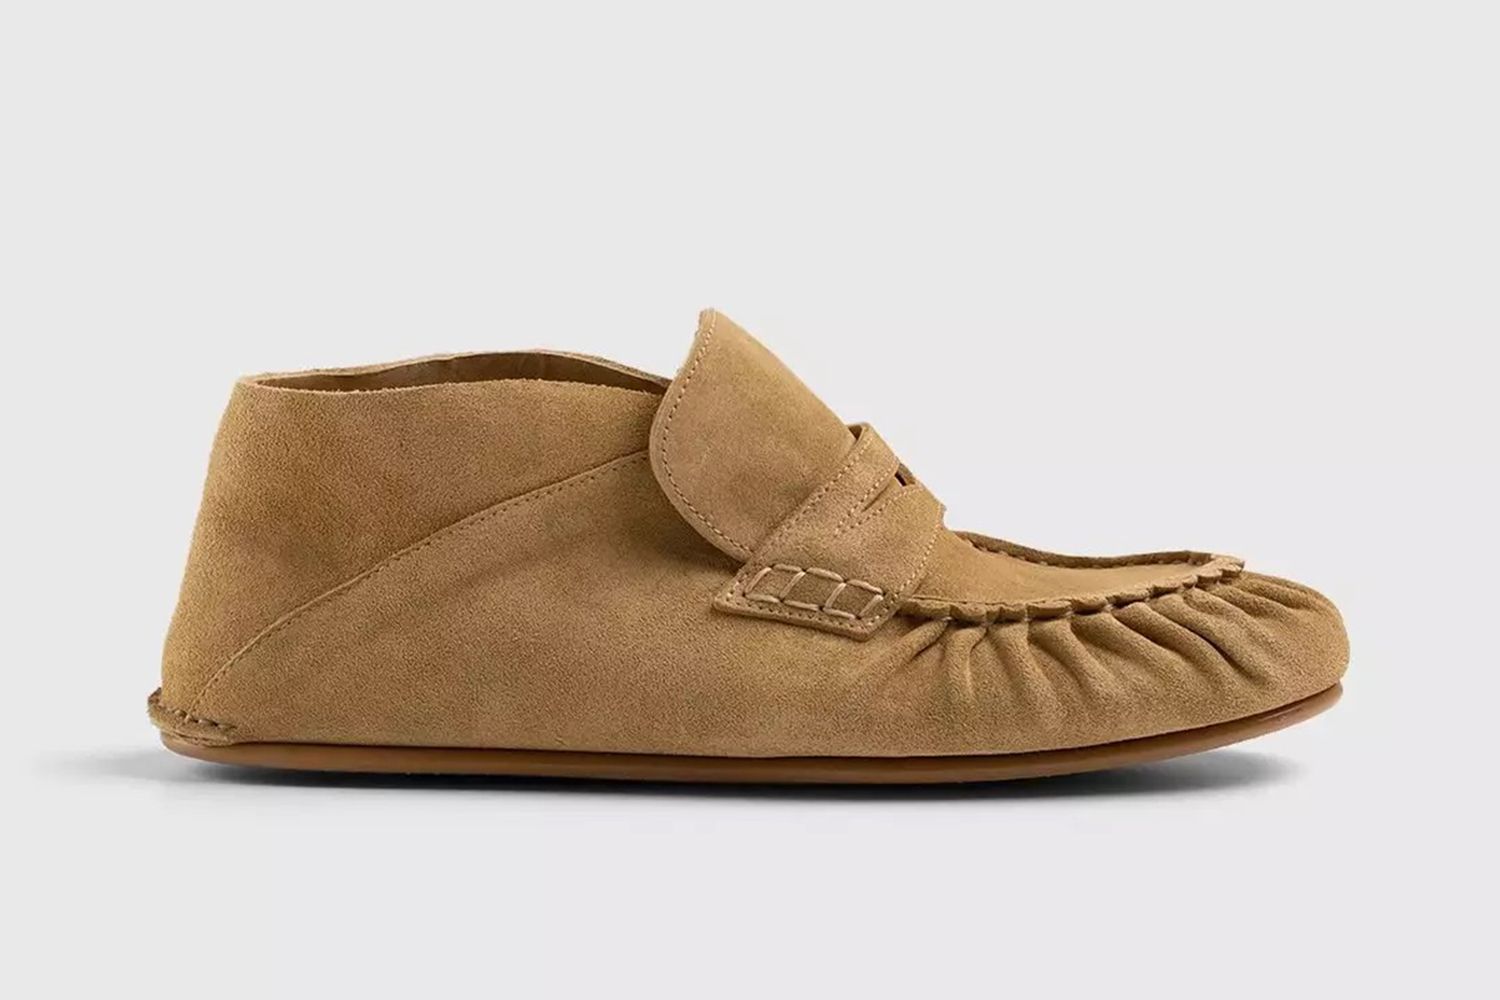 Paula's Ibiza Suede Loafer